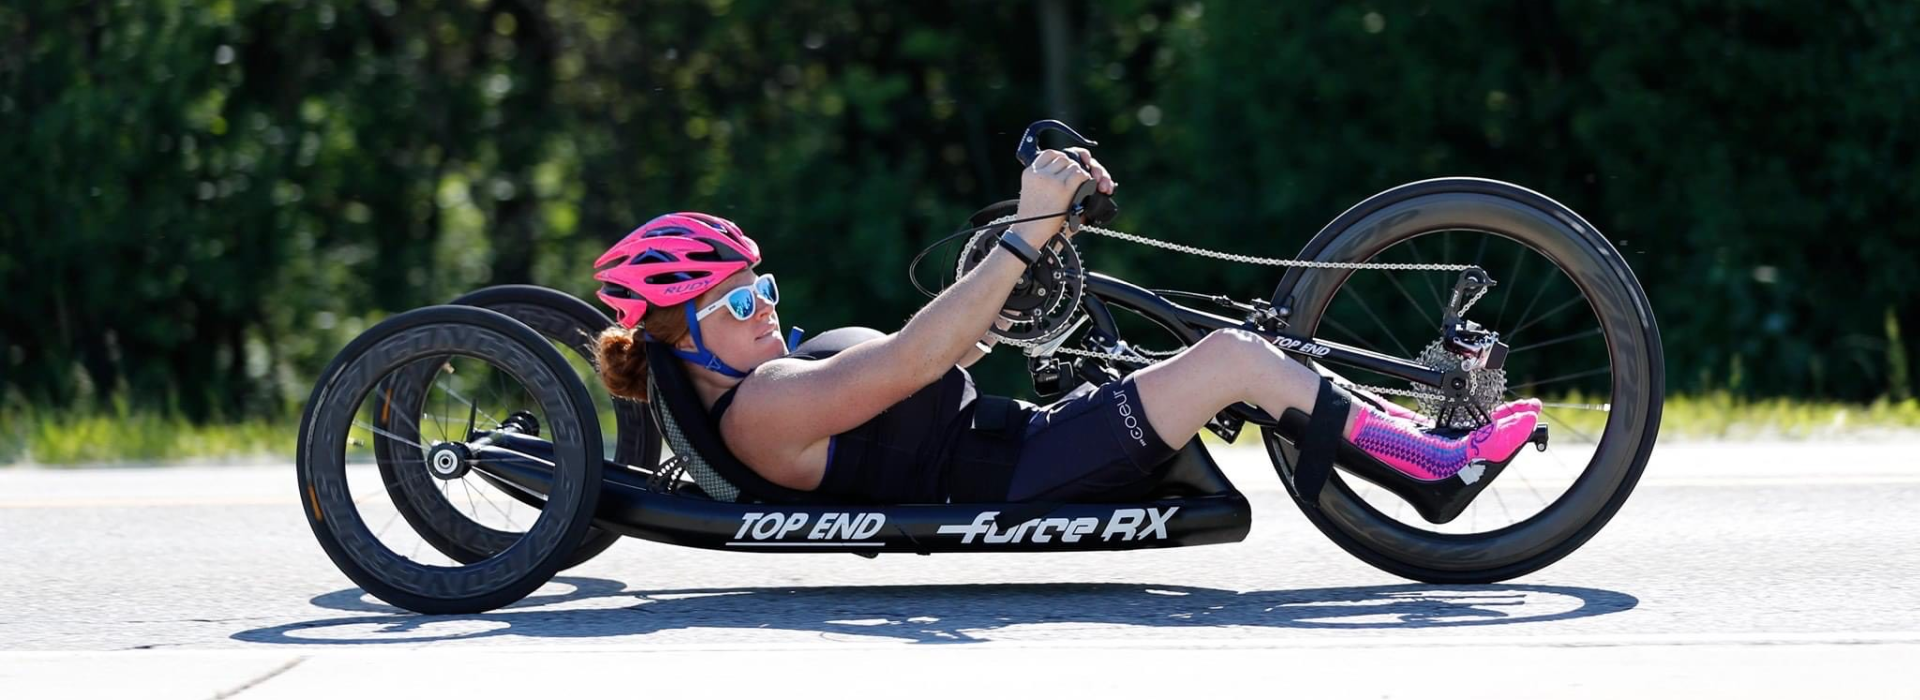 Mary Kate Callahan riding handcycle on road